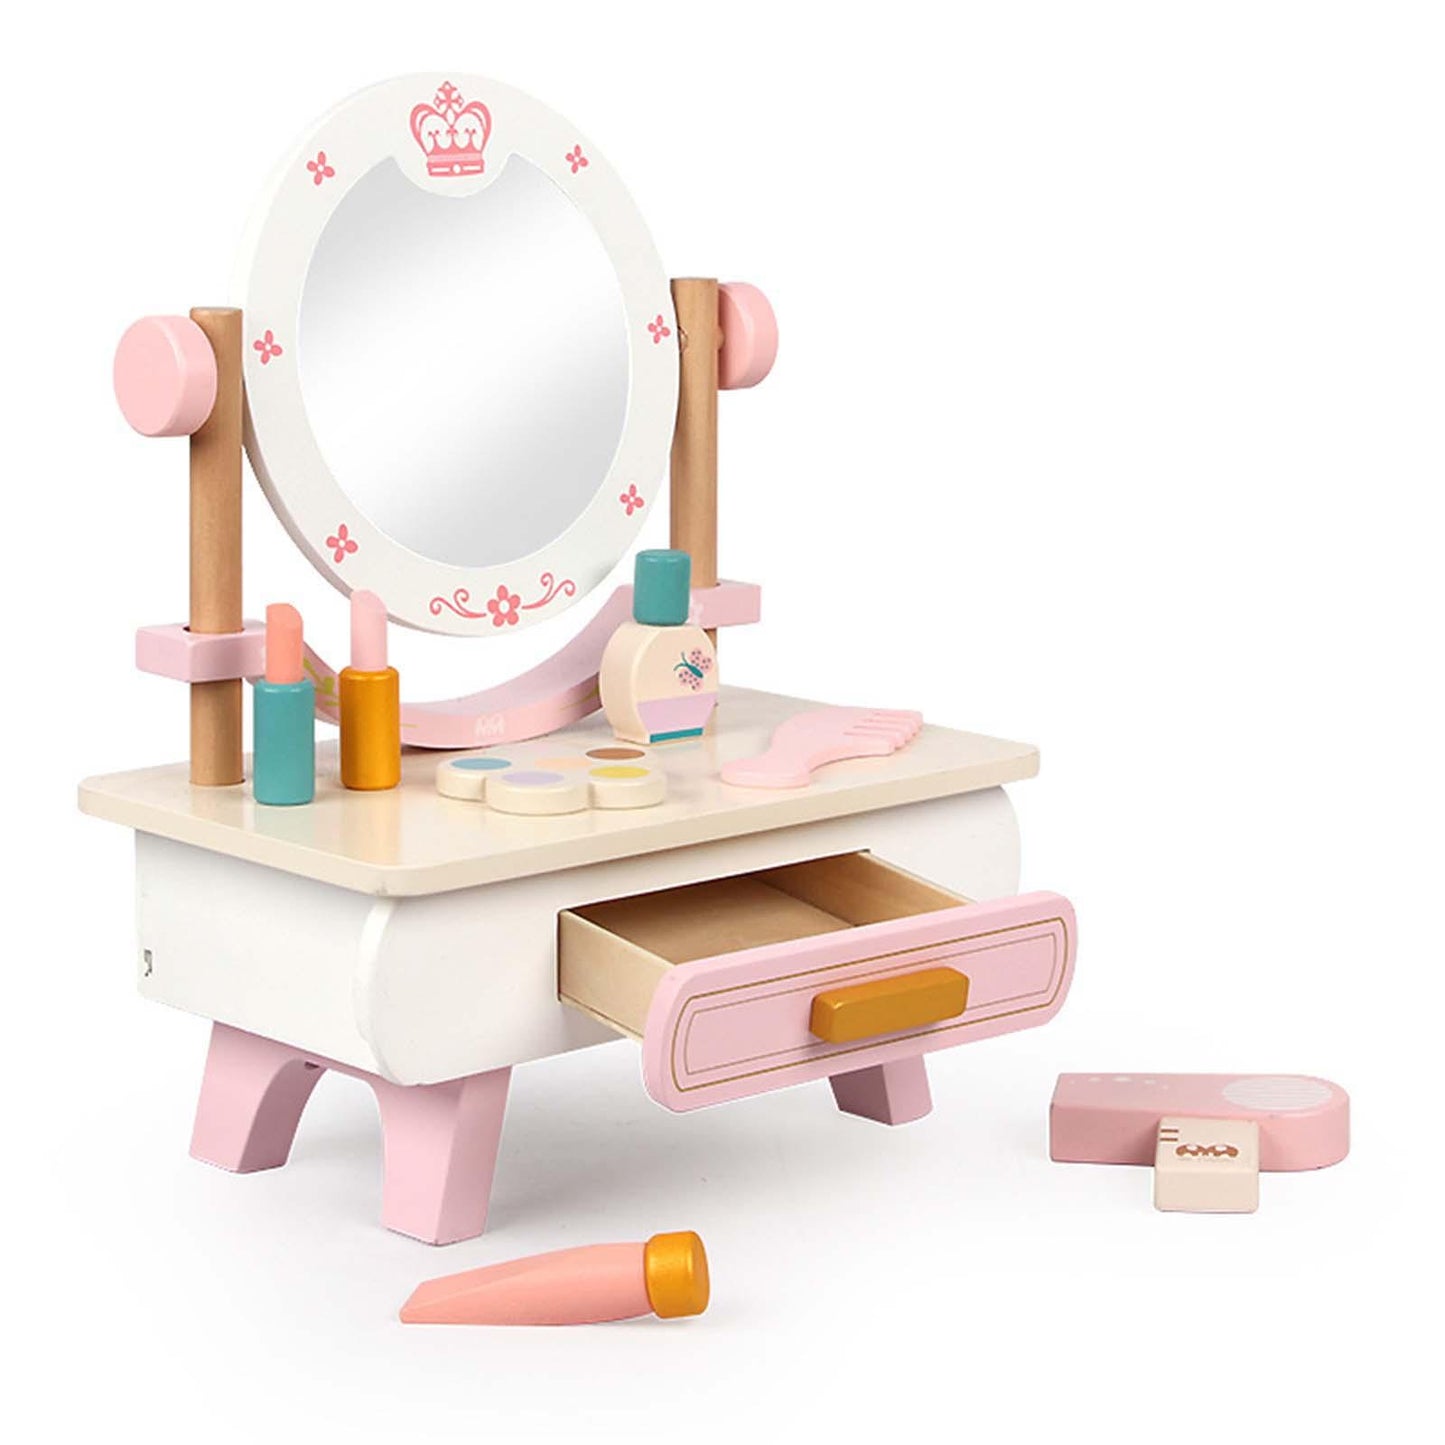 Enchanted Beauty: Wooden Princess Vanity Table with Makeup Accessories